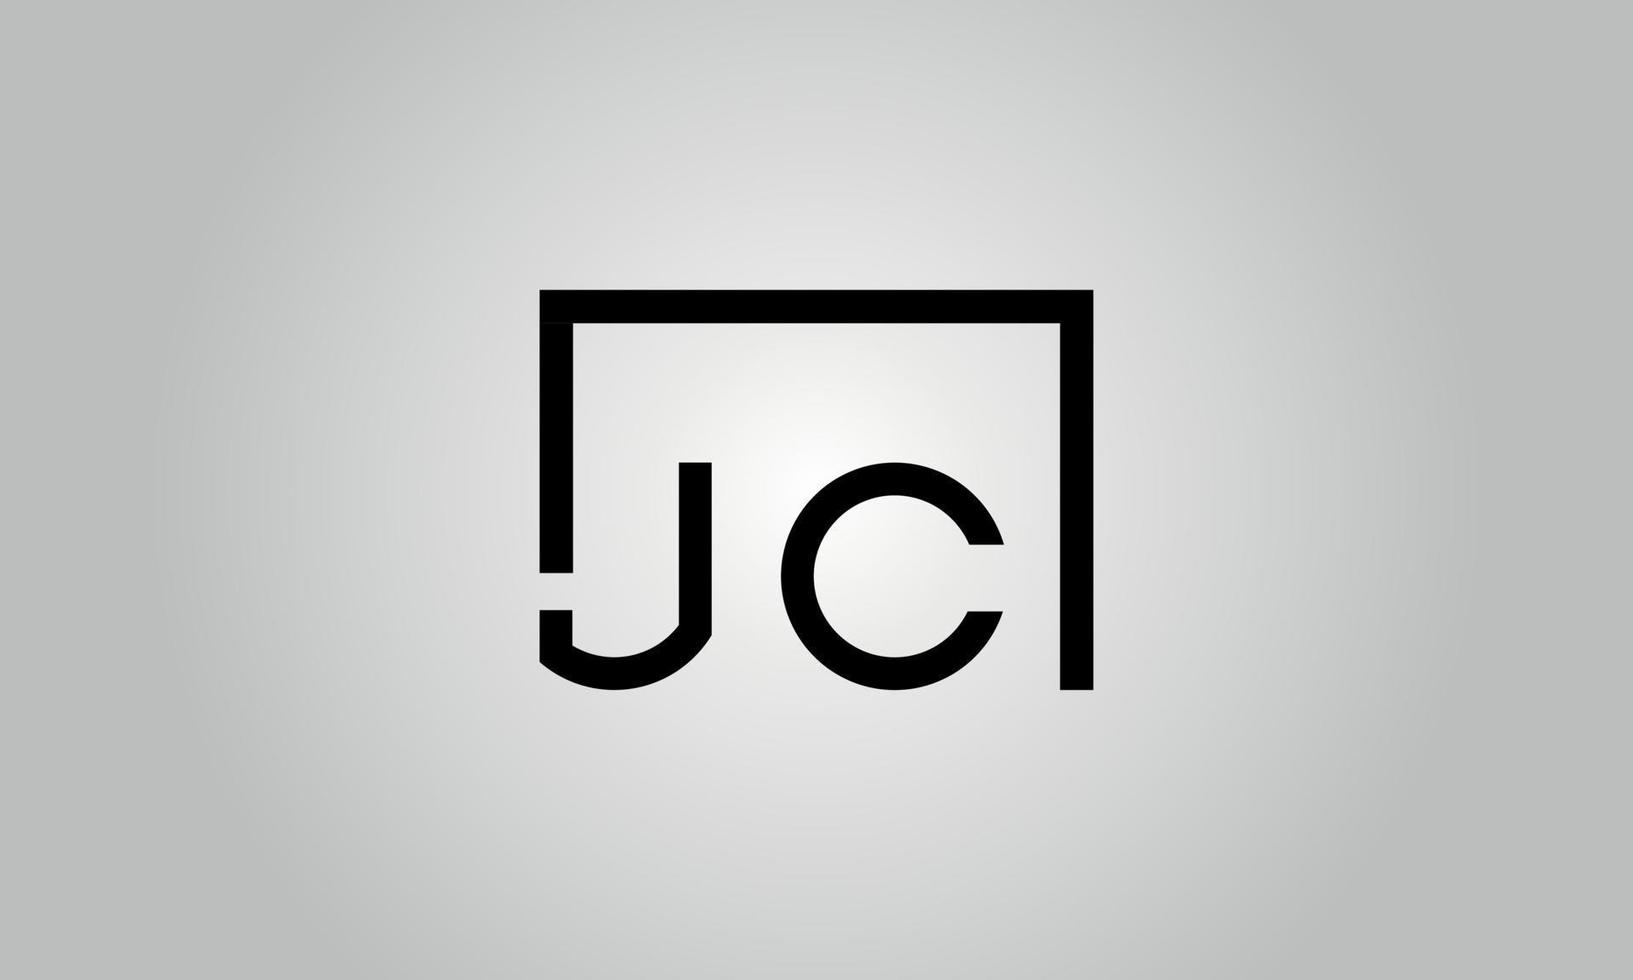 Letter JC logo design. JC logo with square shape in black colors vector free vector template.